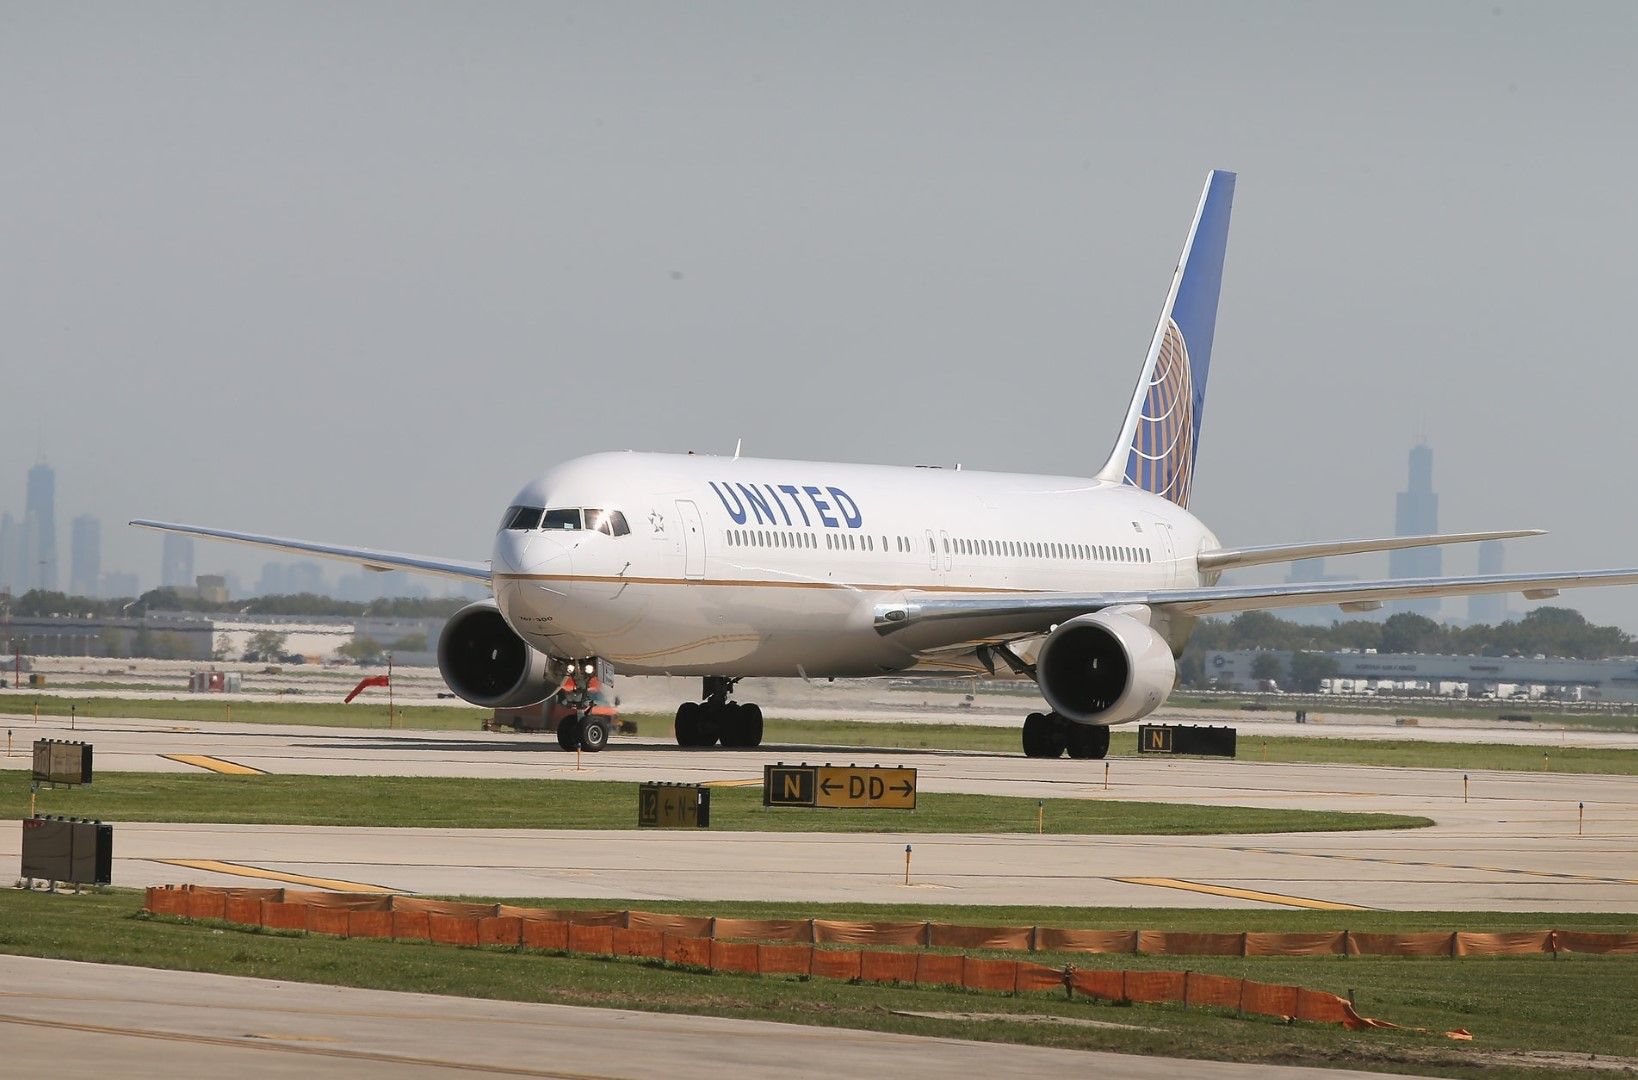 Pilots at United will vote on contract after tentative deal